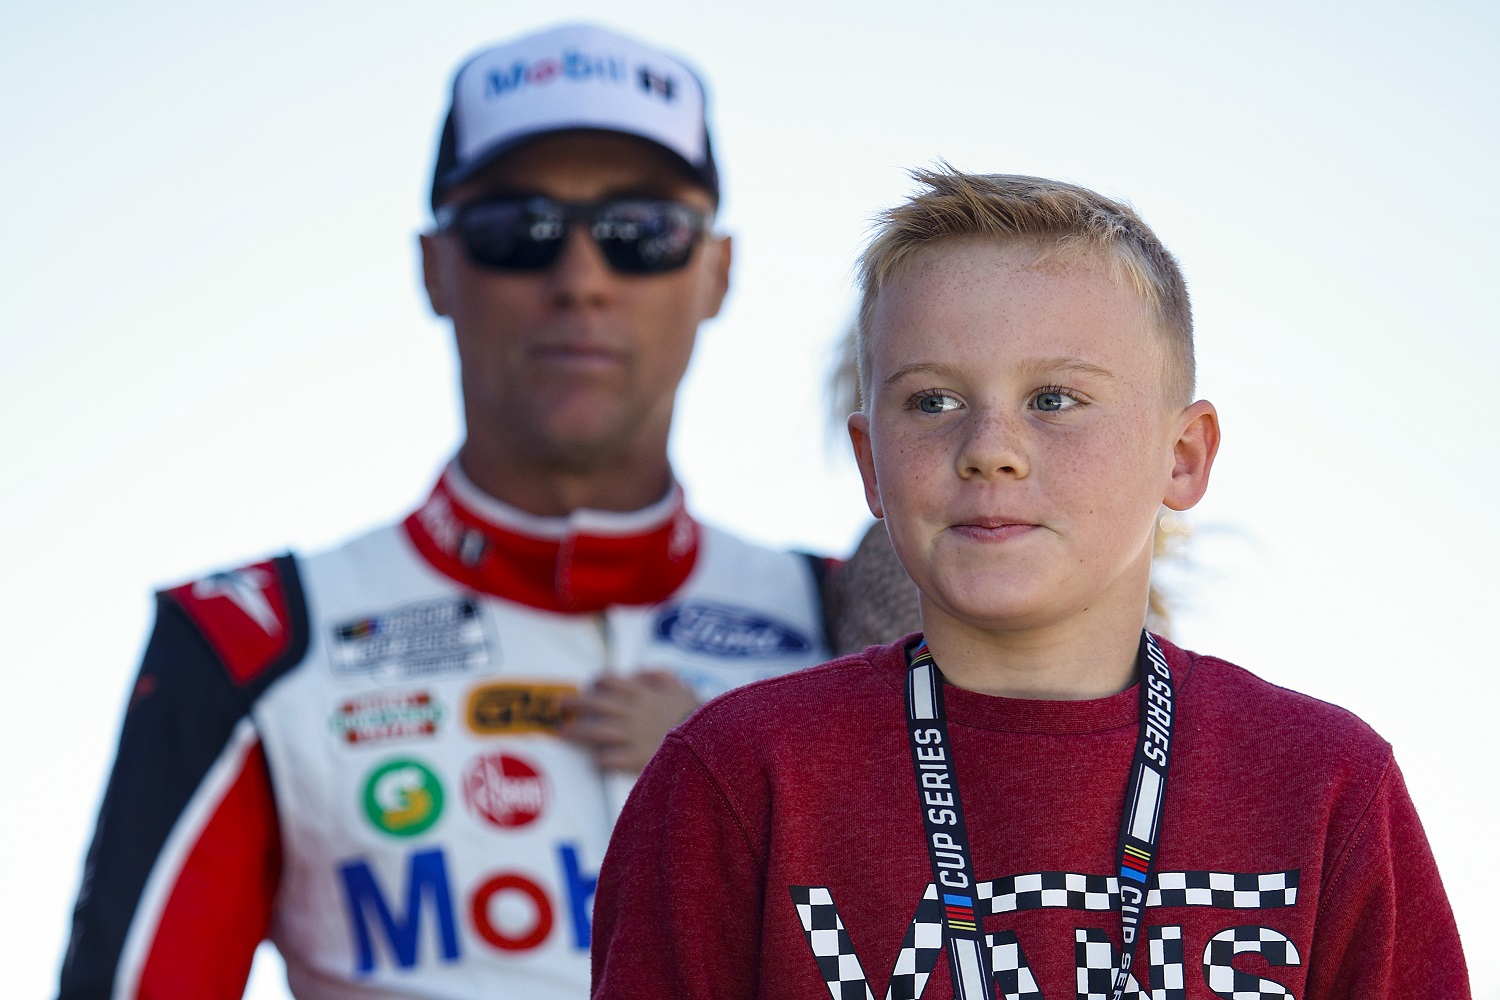 Keelan Harvick, the son of NASCAR Cup Series driver Kevin Harvick, walks onstage during driver intros prior to the Folds of Honor QuikTrip 500 at Atlanta Motor Speedway on March 20, 2022.